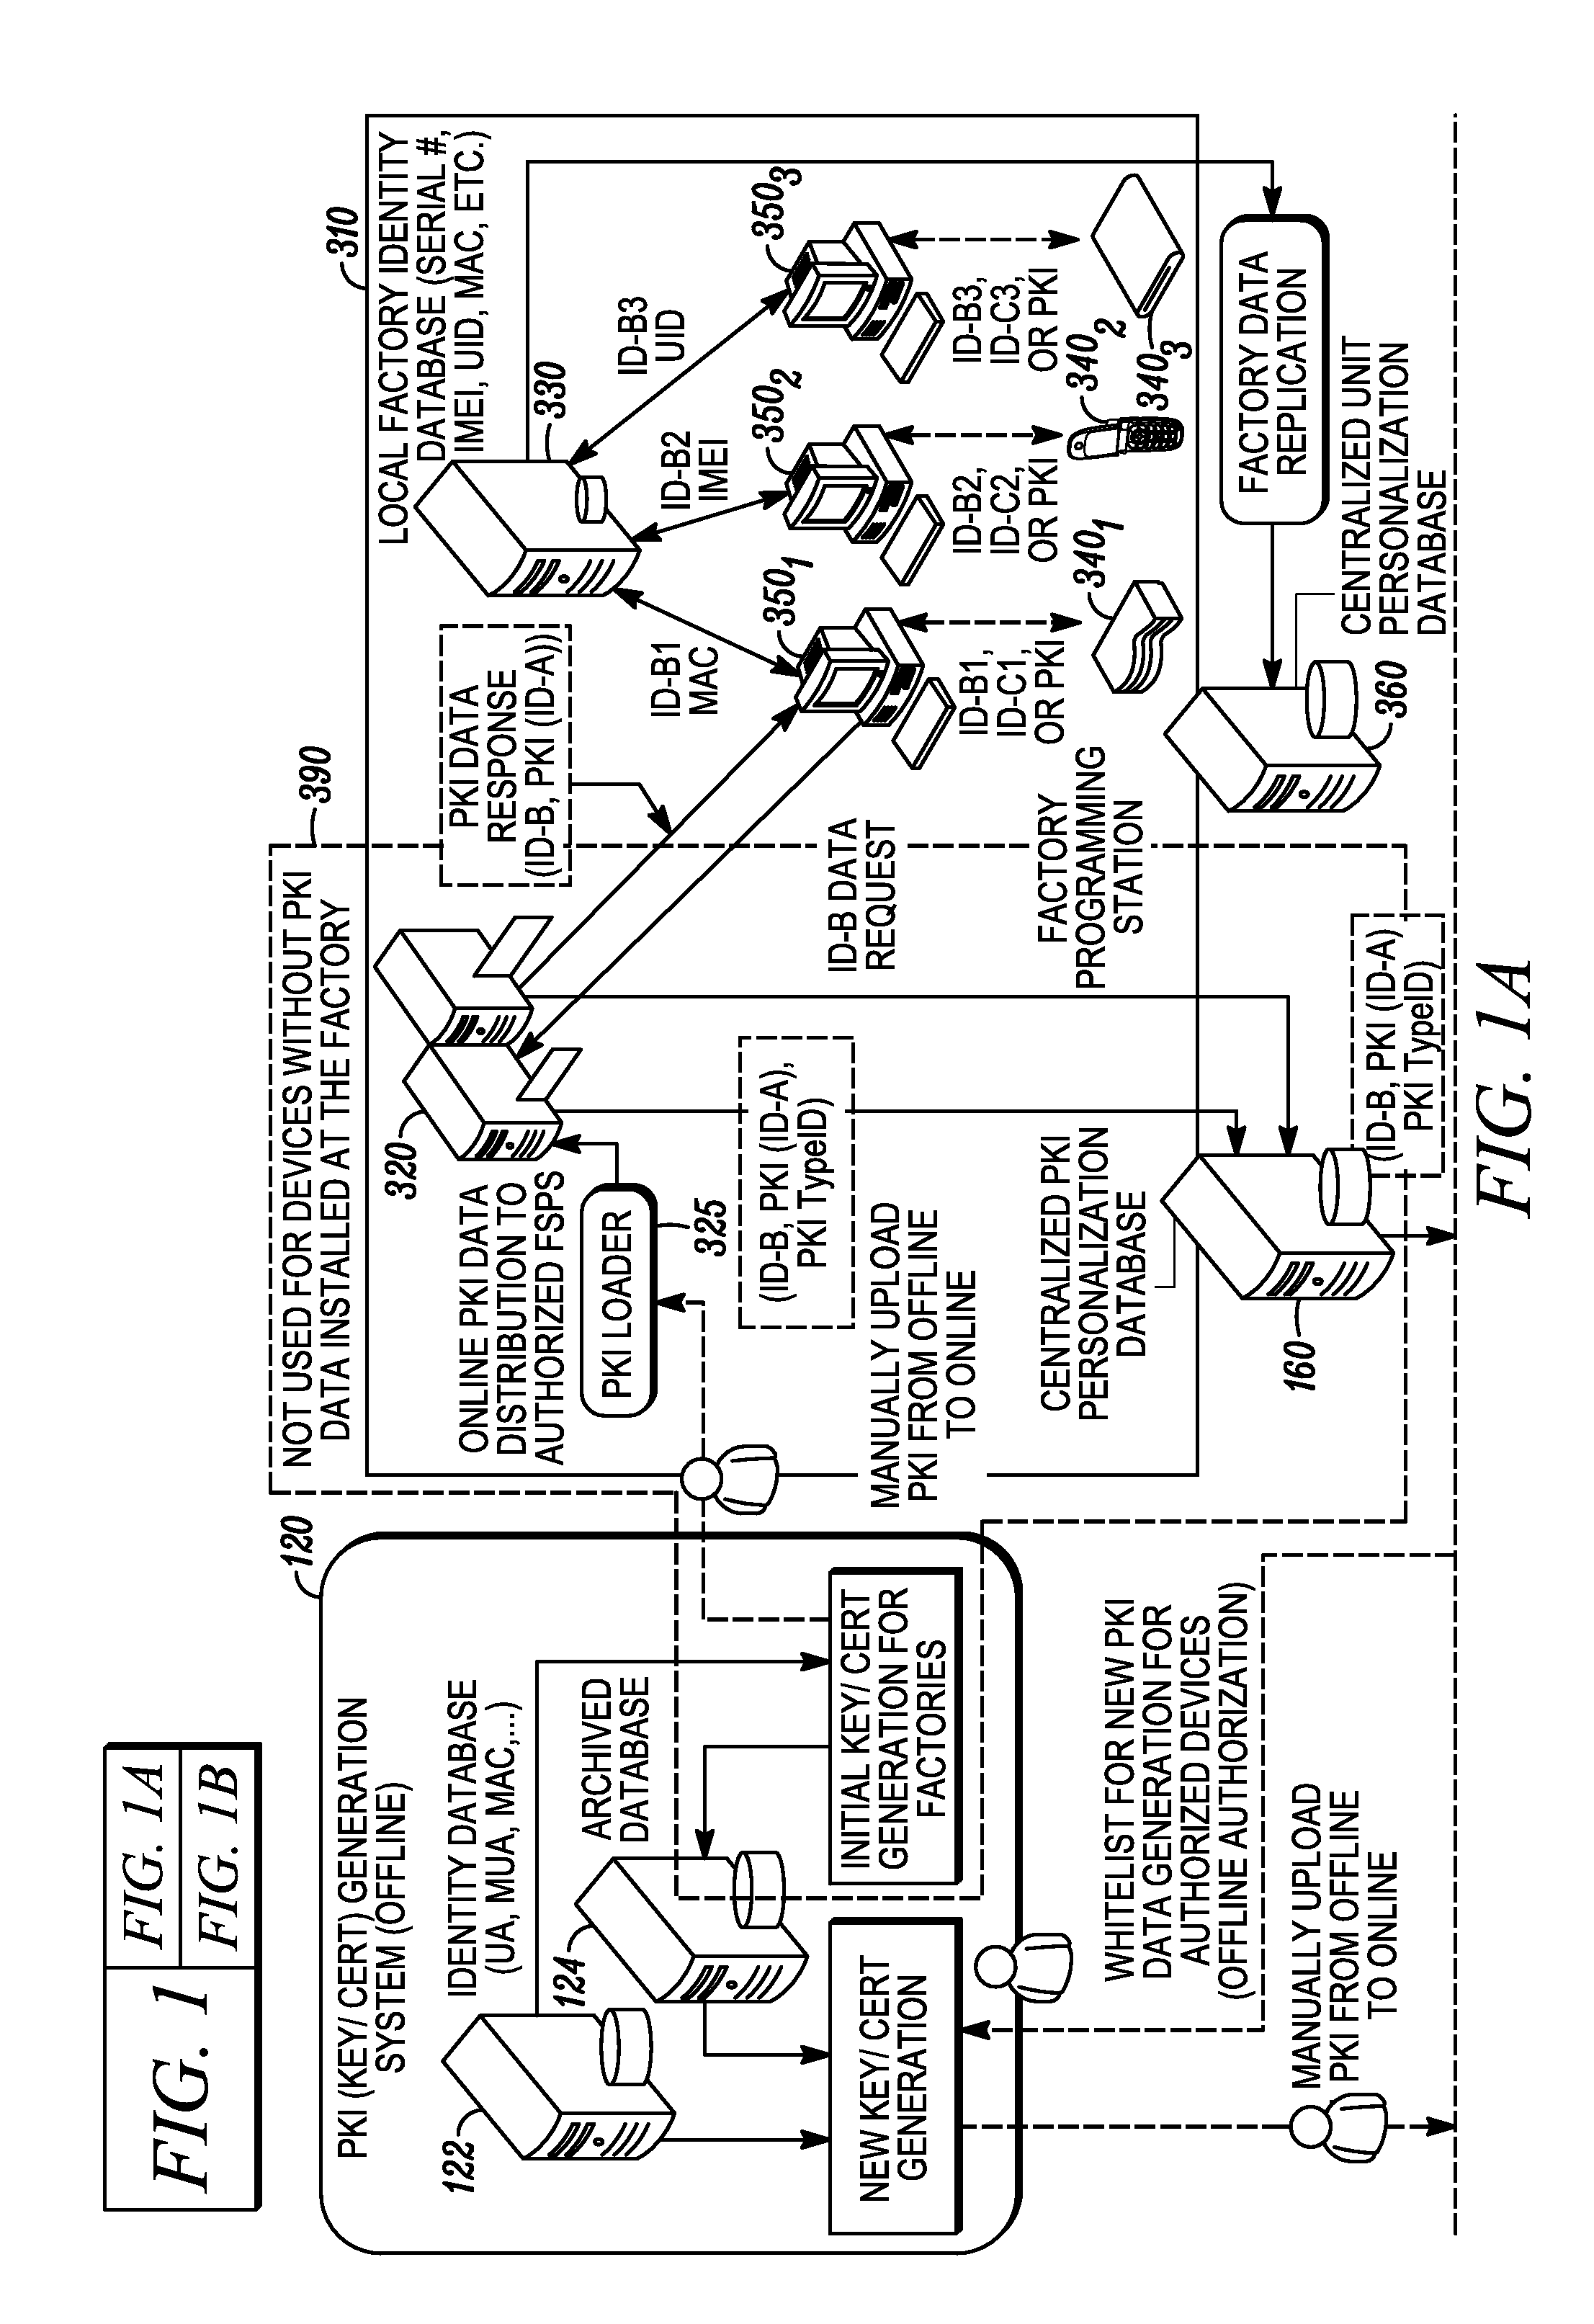 Online secure device provisioning with online device binding using whitelists